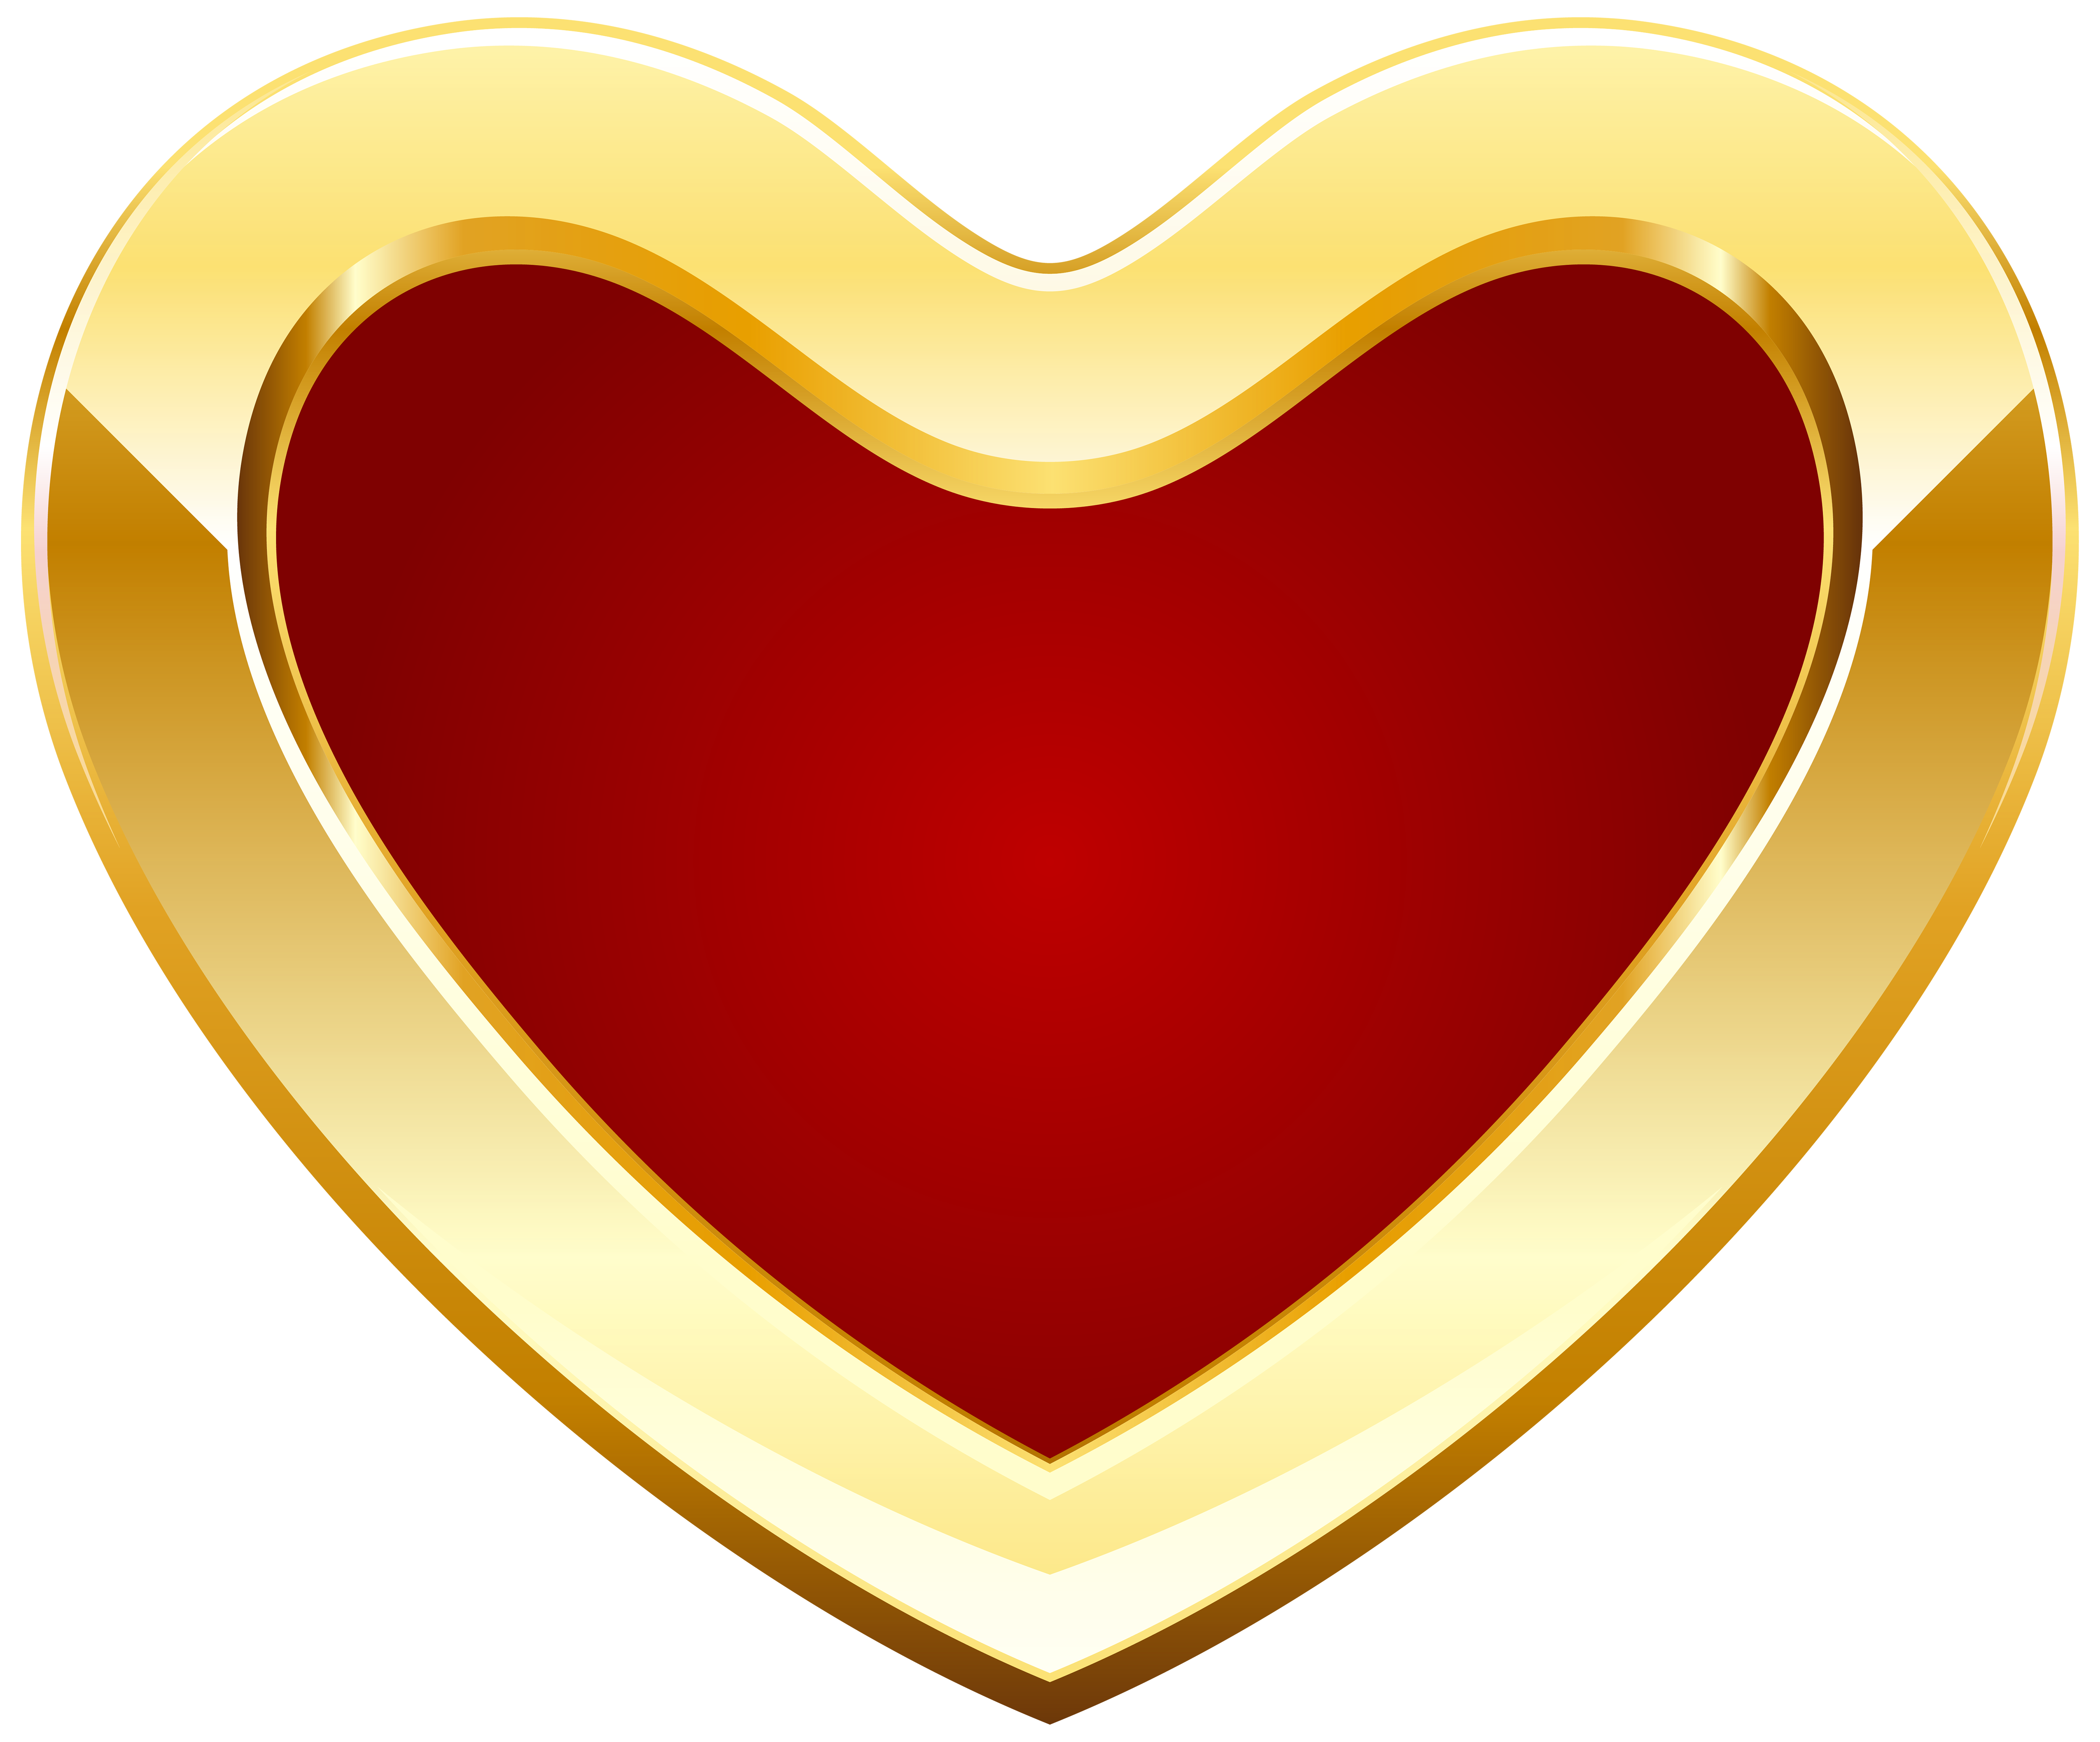 Red and Gold Heart PNG Clipart - Best WEB Clipart